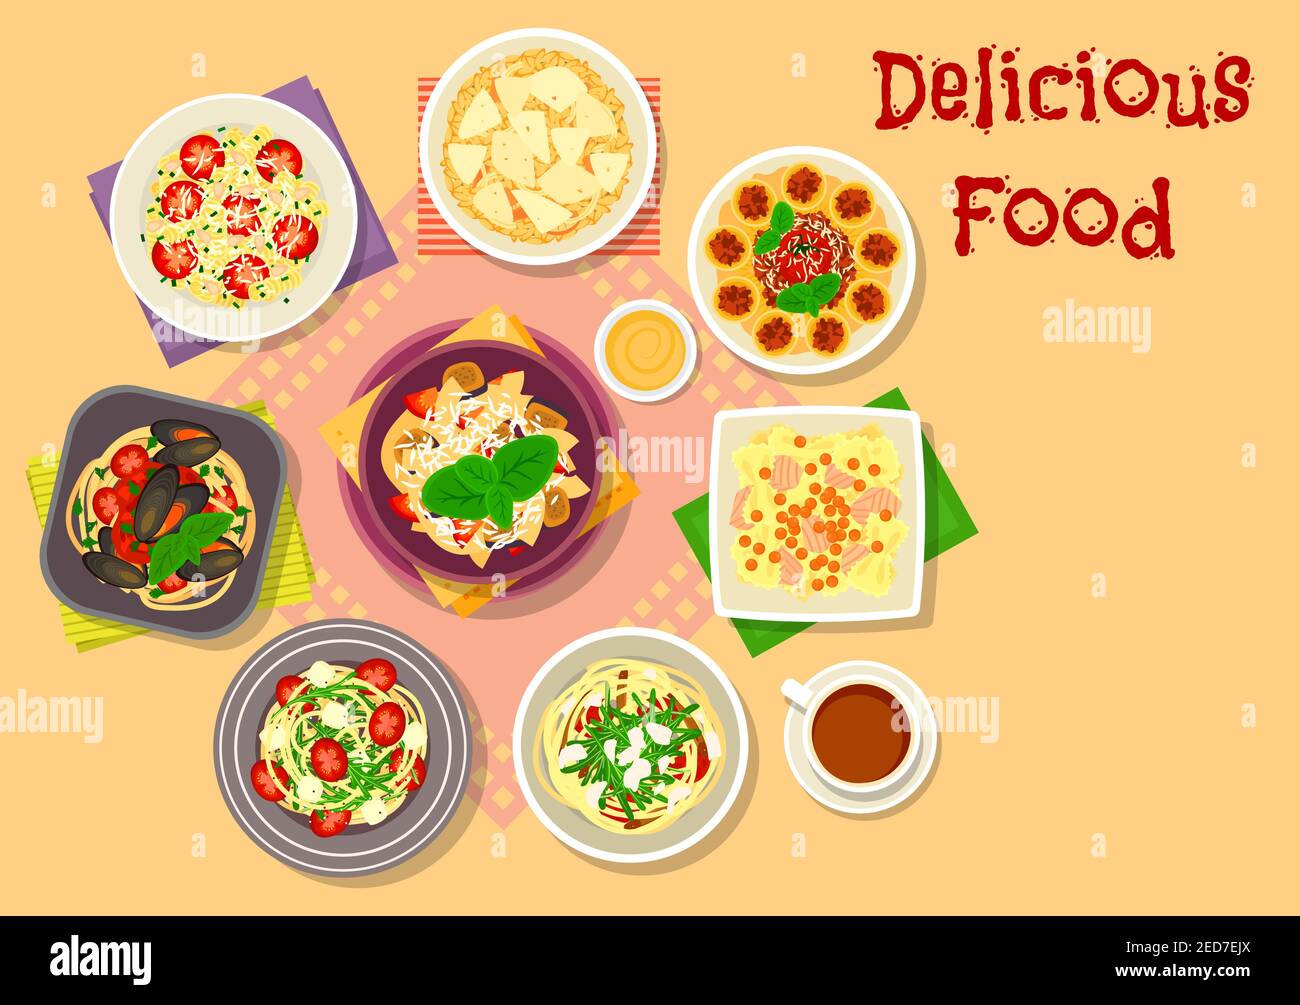 Italian cuisine icon of tomato pasta with pesto, basil, anchovy, veggies, seafood spaghetti, baked pasta with meat and cheese sauce, salmon pasta with Stock Vector